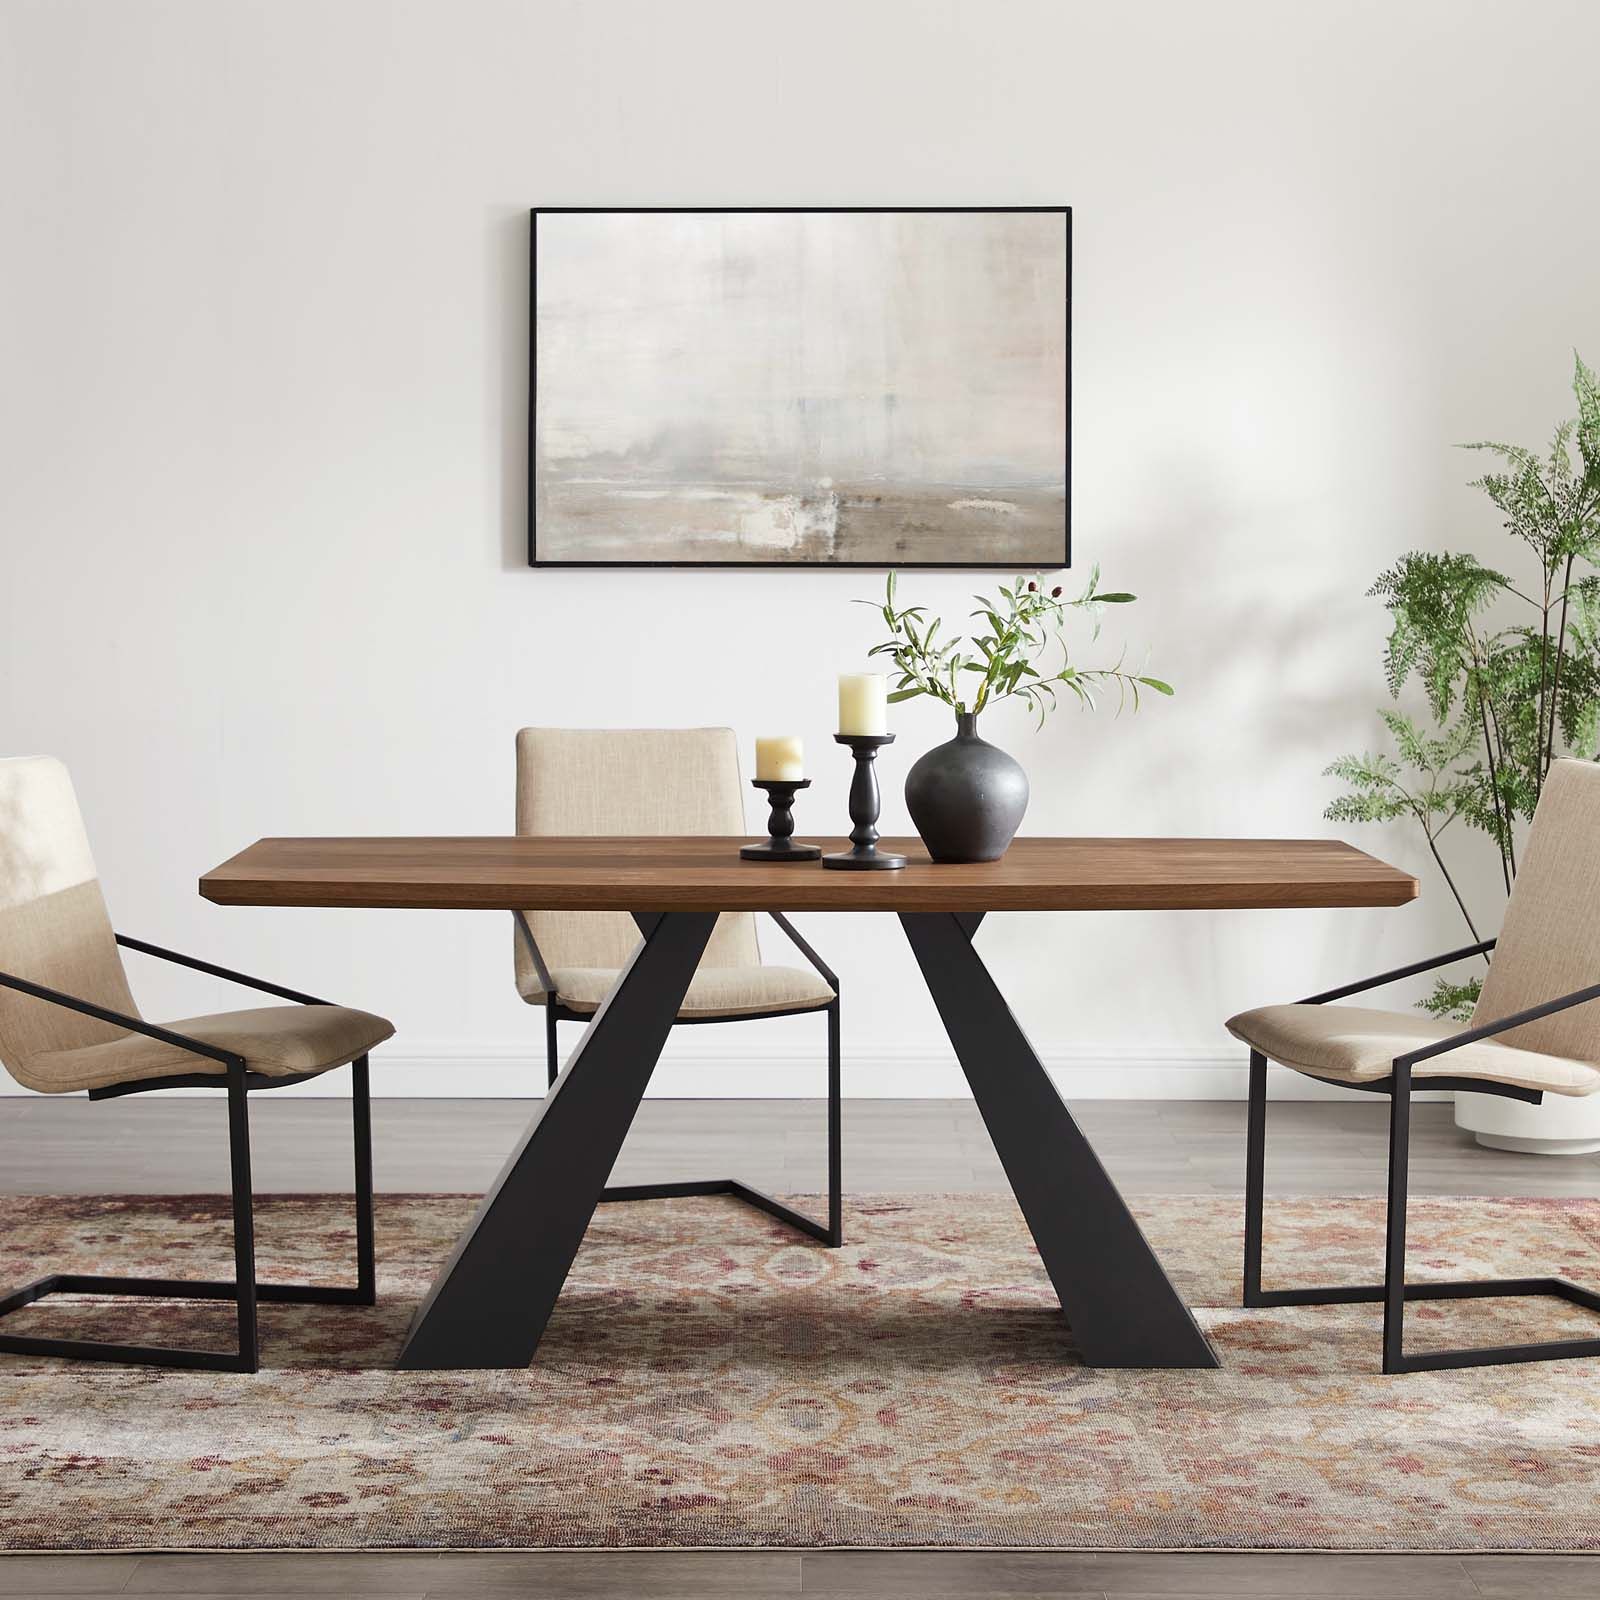 2019 Walnut Tove Dining Tables In Elevate Dining Table In Walnut (View 12 of 15)